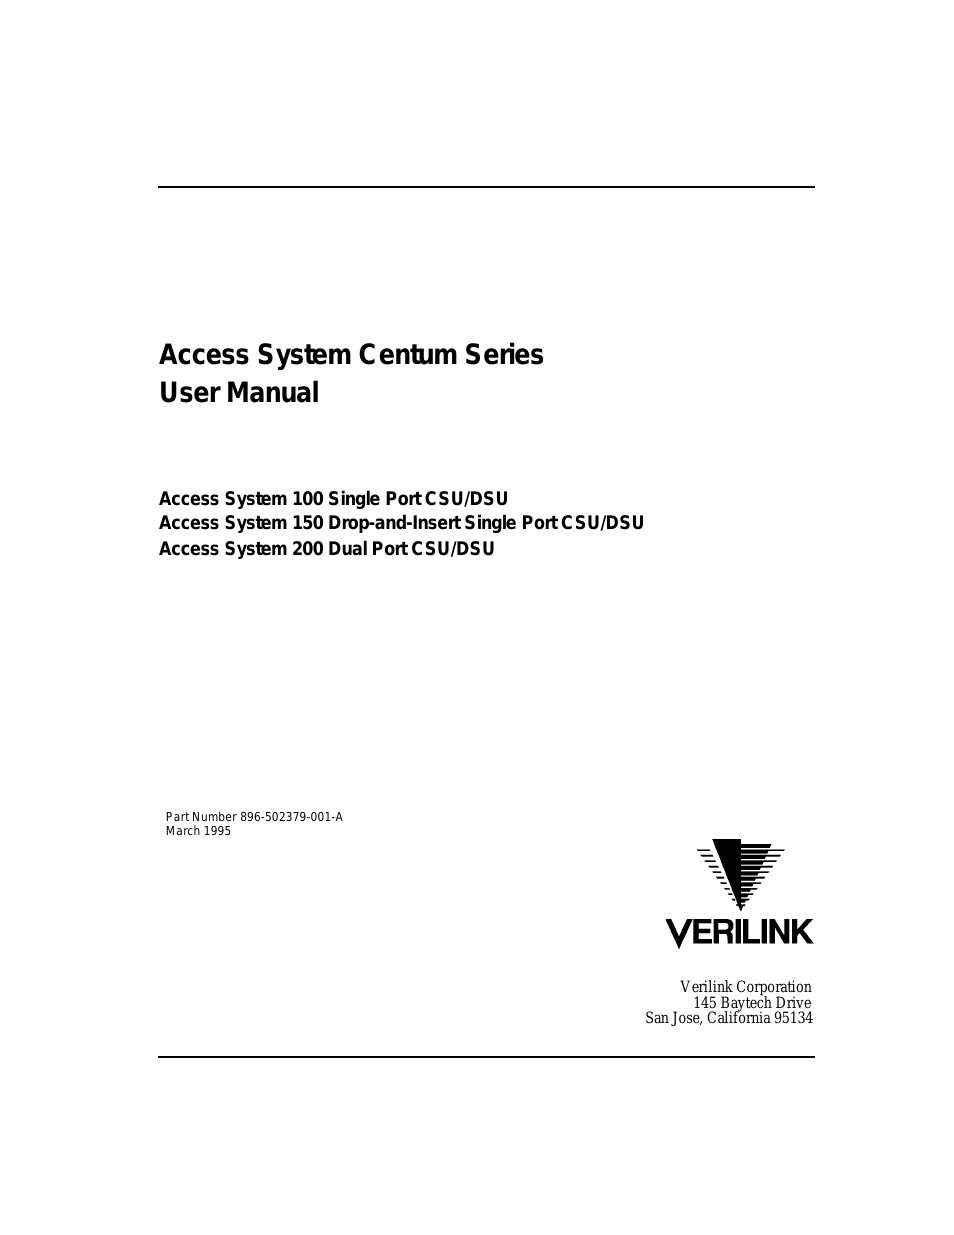 AS150 (896-502379-001) Product Manual